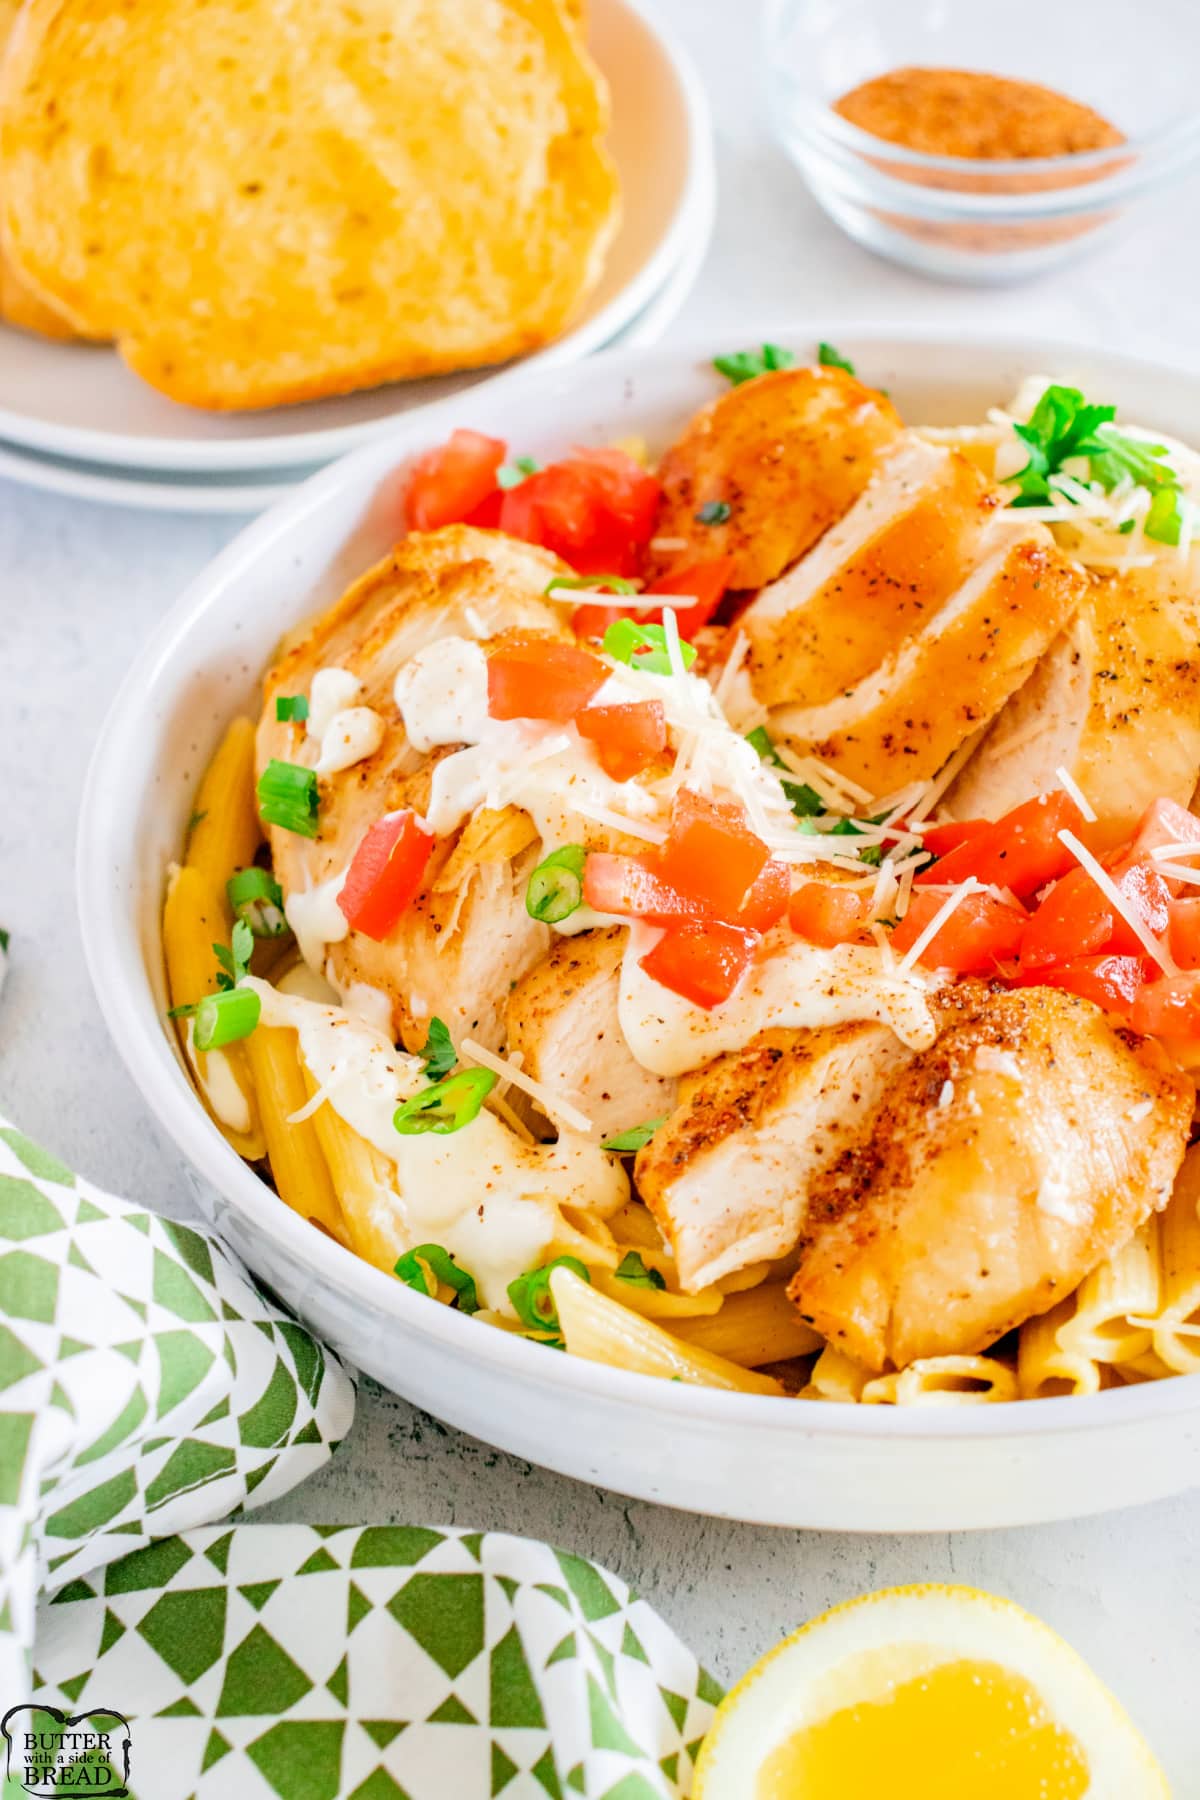 Copycat Chili's Cajun Chicken Pasta is the perfect dinner recipe that only takes 30 minutes to make. Delicious pasta recipe made with perfectly seasoned chicken and a creamy sauce. 